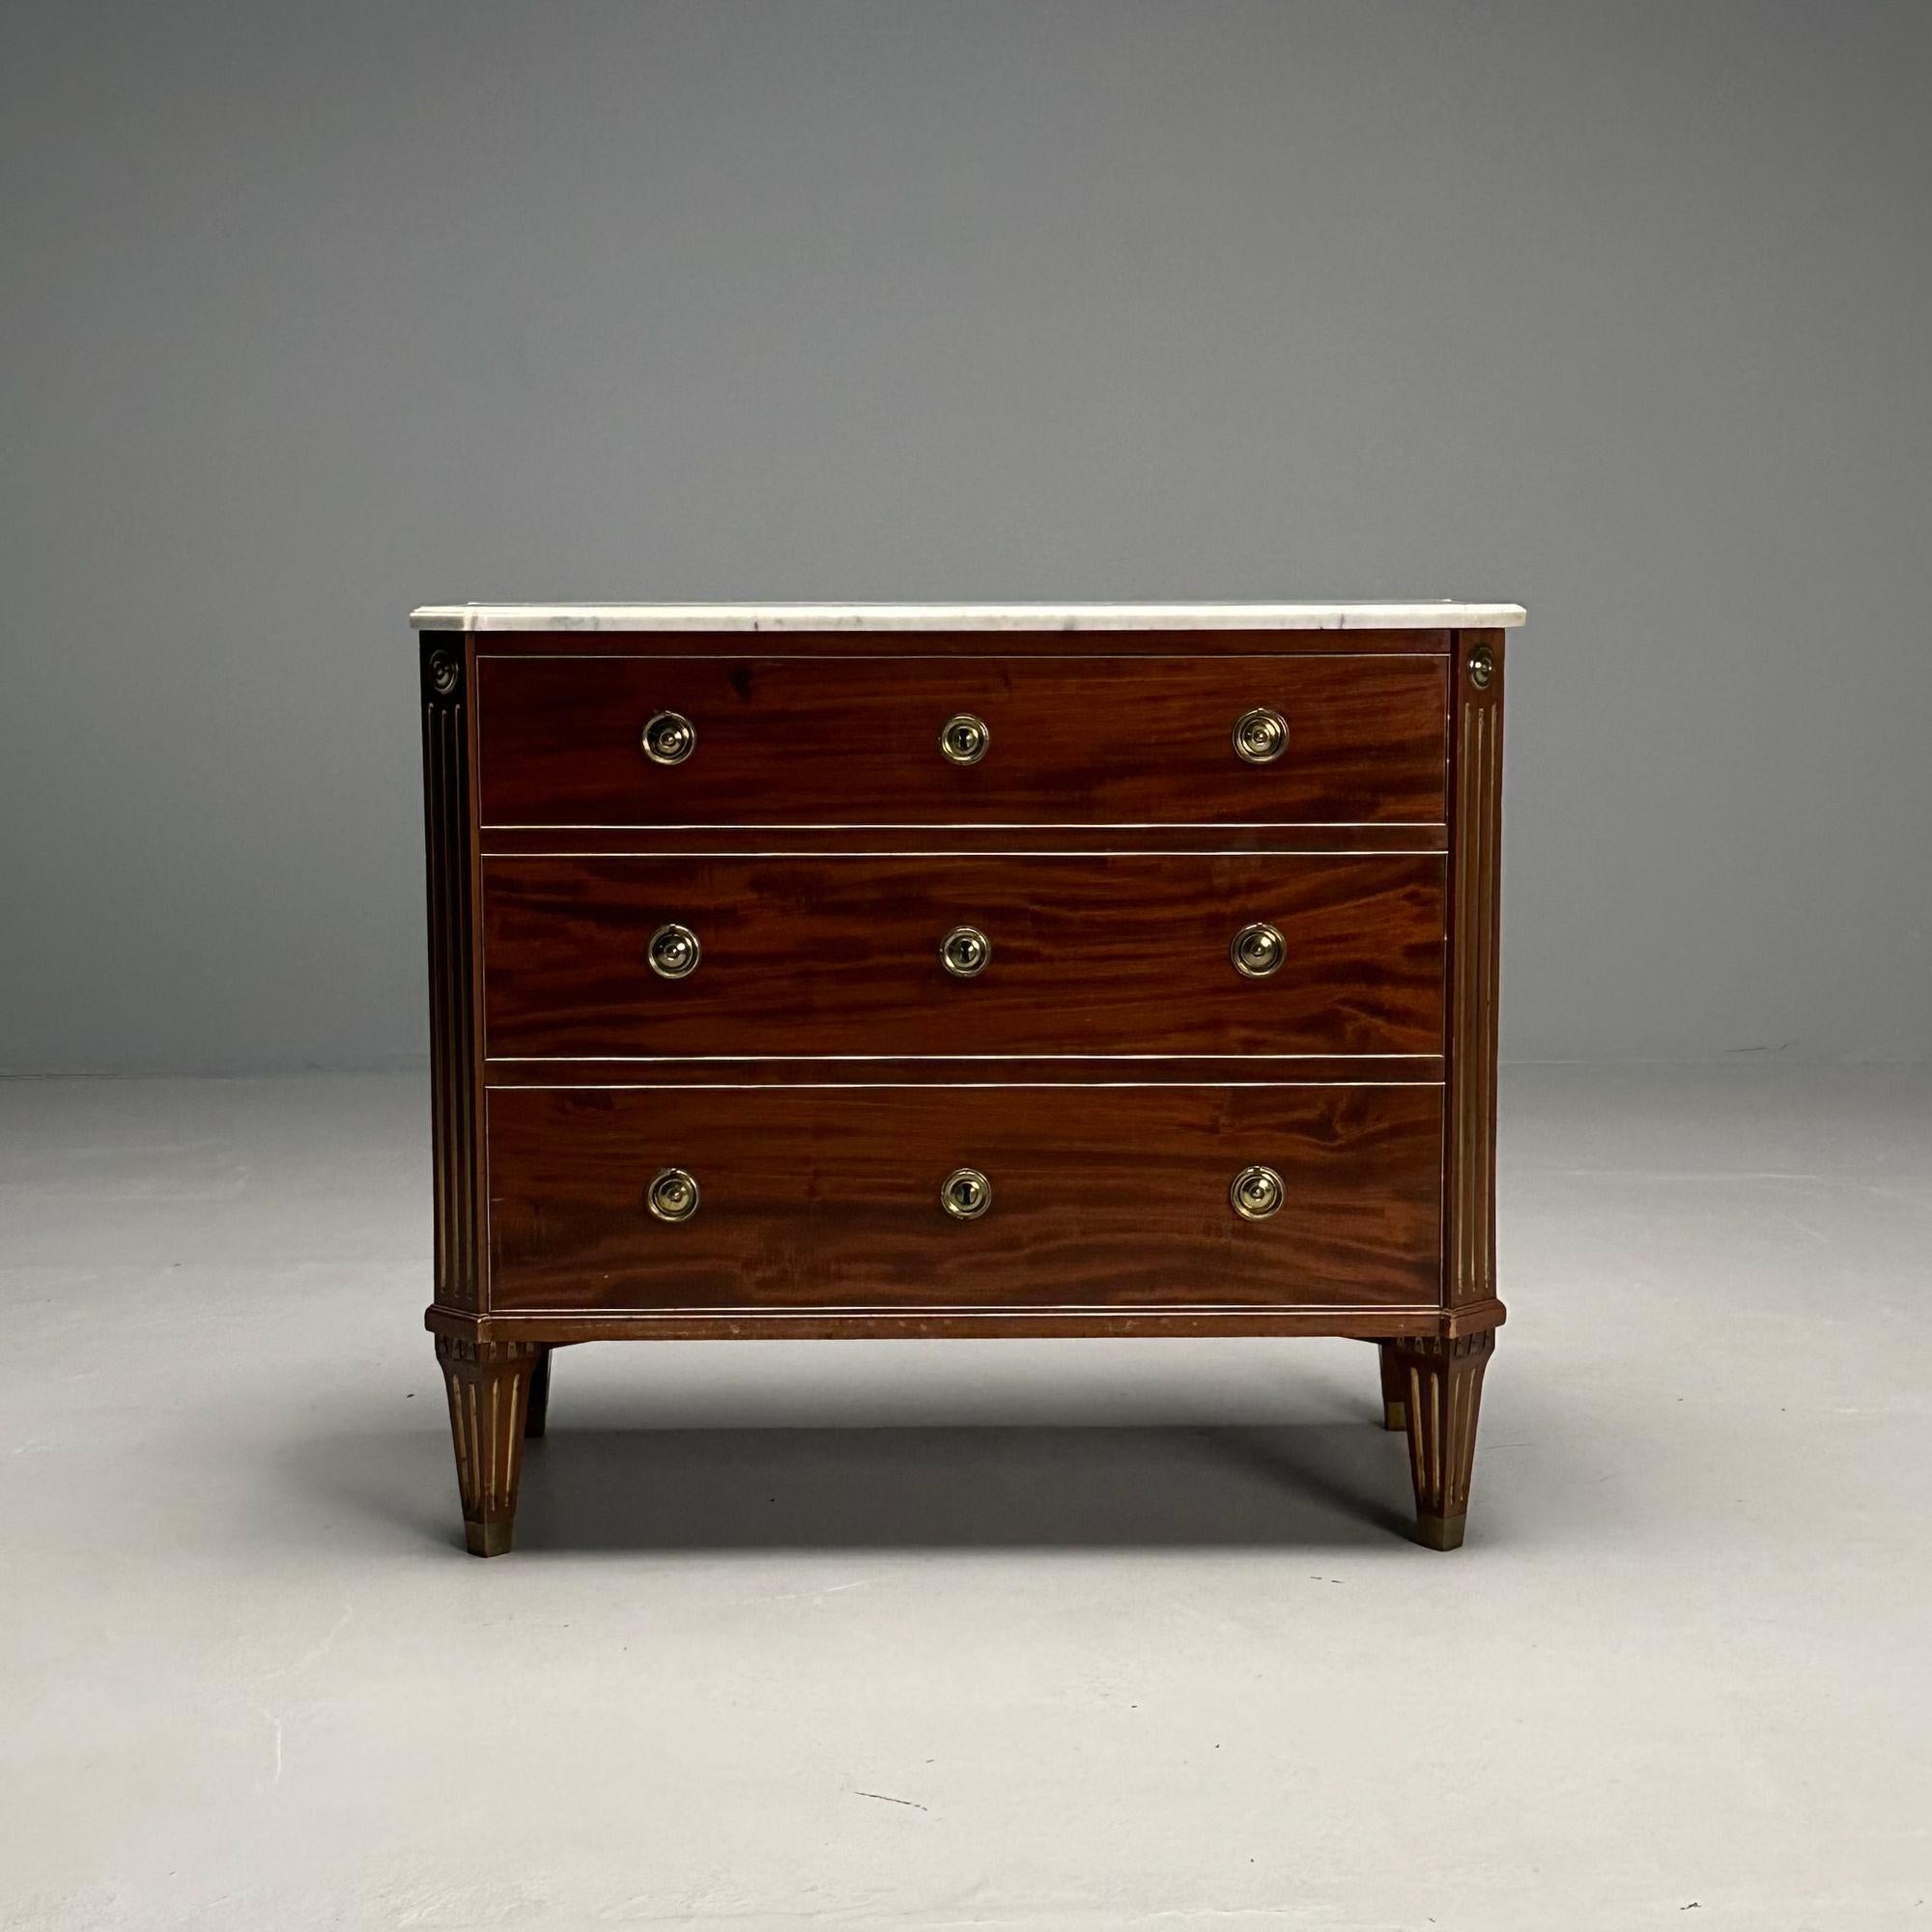 Gustavian, Louis XVI Style, Swedish Chest, Walnut, Brass, Marble, Sweden, 1960s

Gustavian chest designed and produced in Sweden in the later half of the 20th century. This example having a modern white marble top, walnut veneer, fluted sides, and